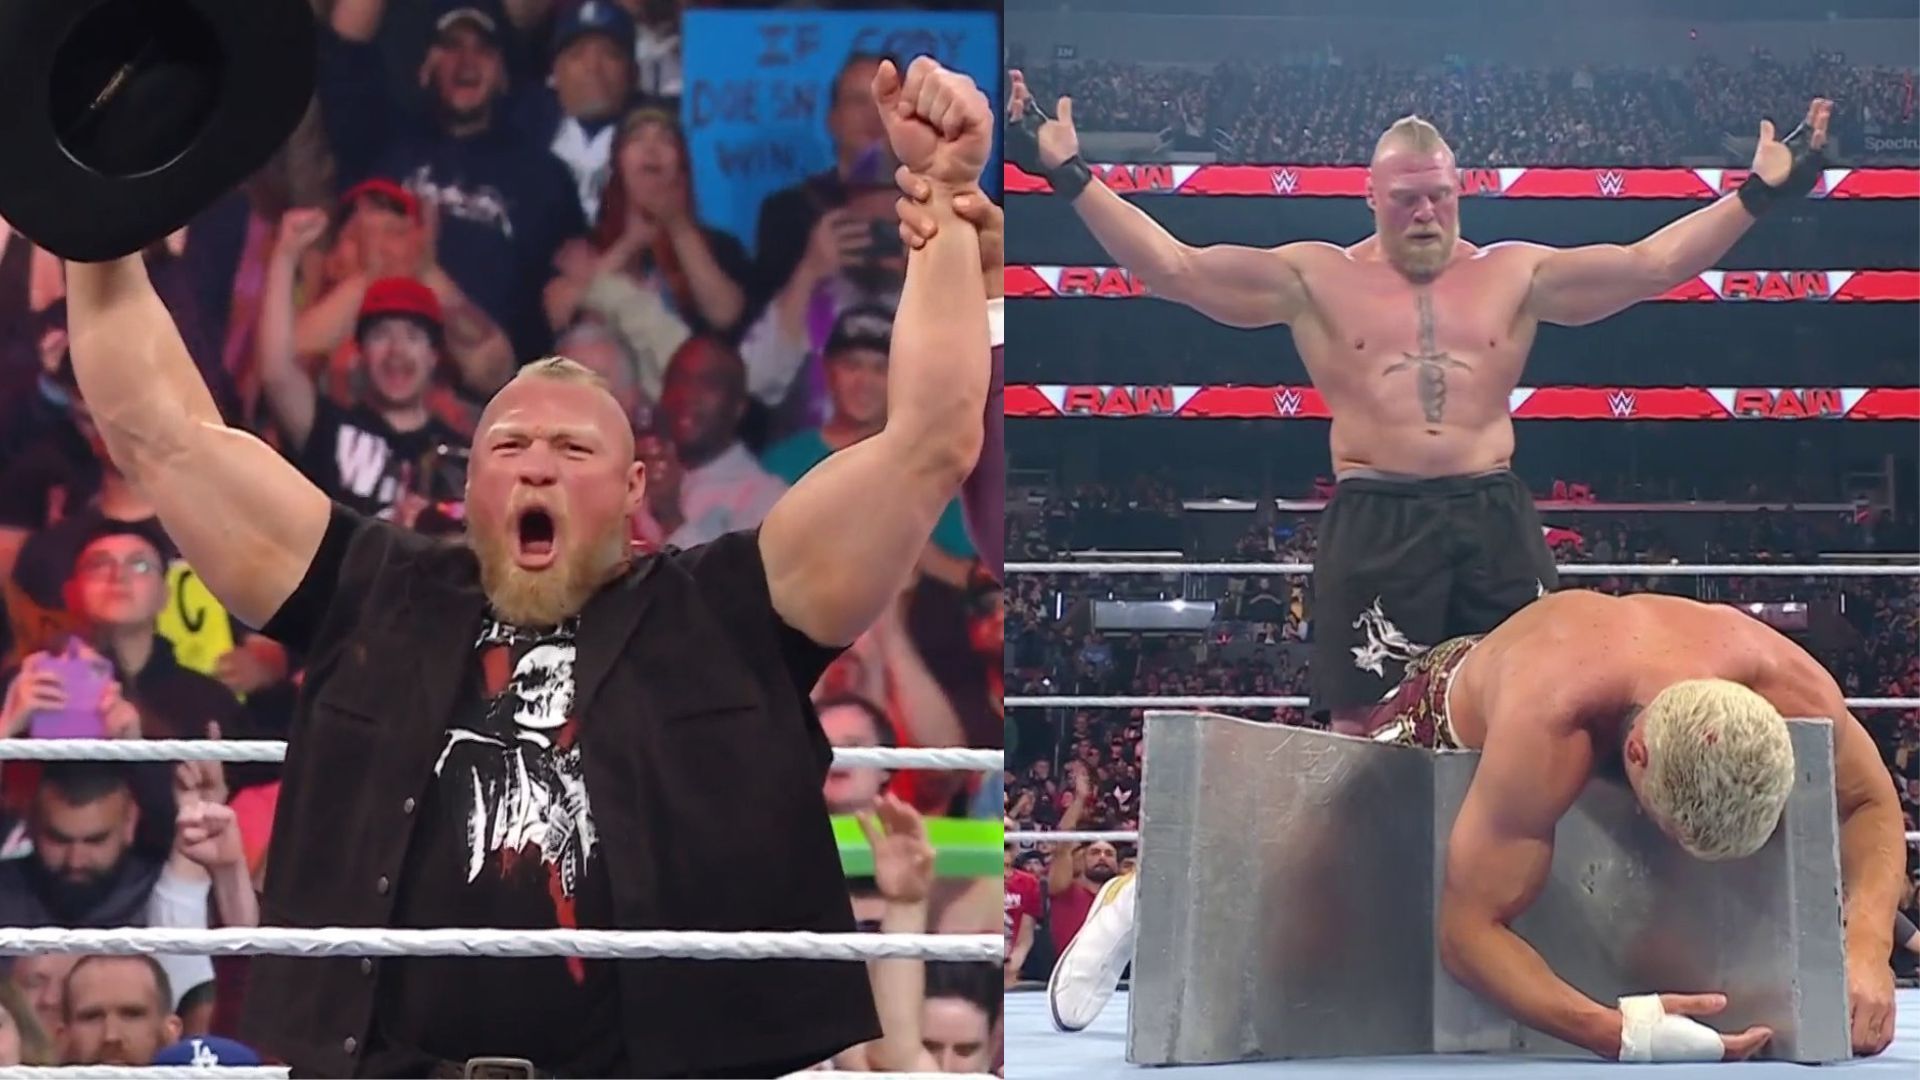 Brock Lesnar turned heel by assaulting Cody Rhodes on WWE RAW